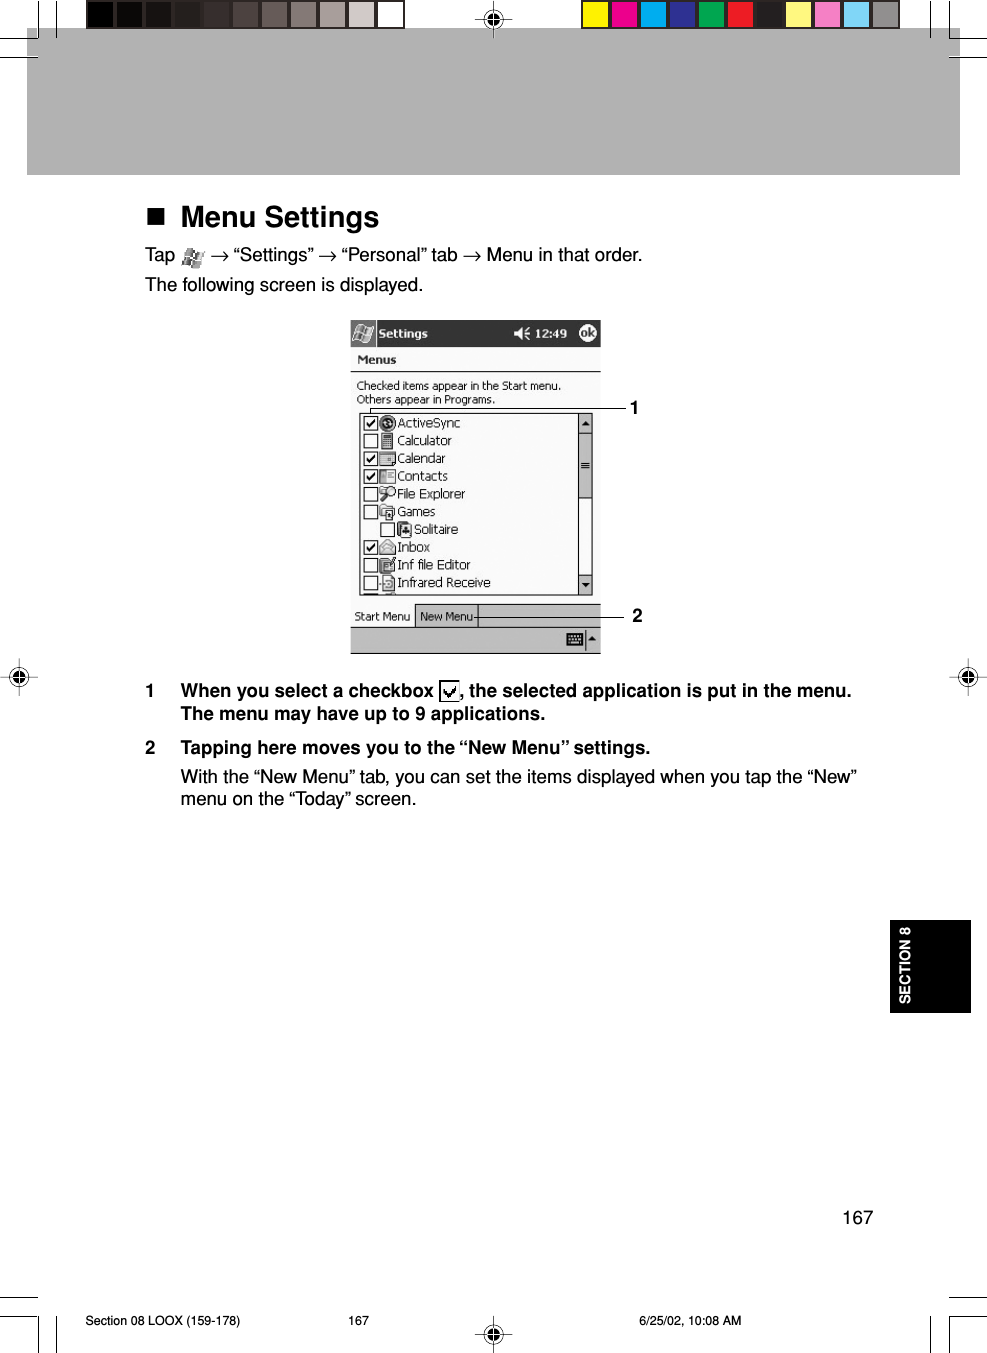 167SECTION 8Menu SettingsTap   → “Settings” → “Personal” tab → Menu in that order.The following screen is displayed.1 When you select a checkbox  , the selected application is put in the menu.The menu may have up to 9 applications.2 Tapping here moves you to the “New Menu” settings.With the “New Menu” tab, you can set the items displayed when you tap the “New”menu on the “Today” screen.21Section 08 LOOX (159-178) 6/25/02, 10:08 AM167